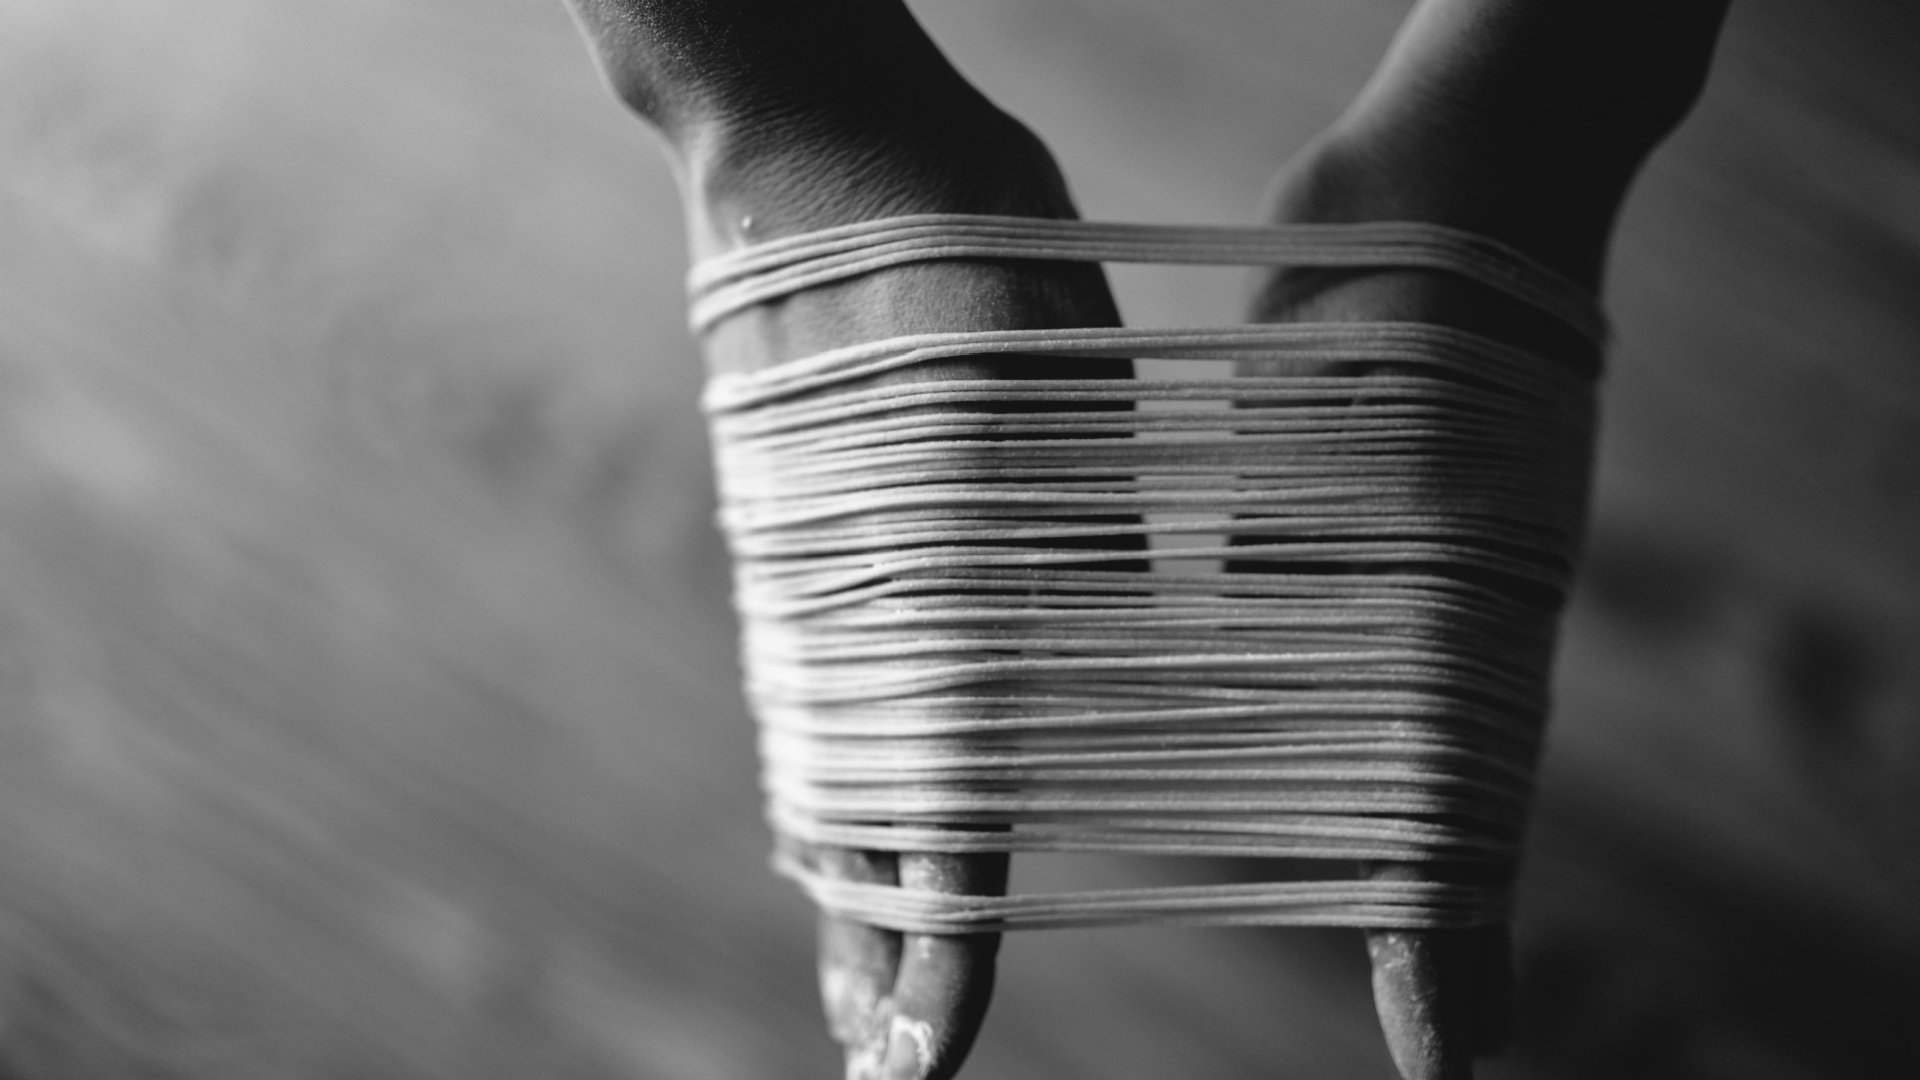 Close-up of bound hands creating tension